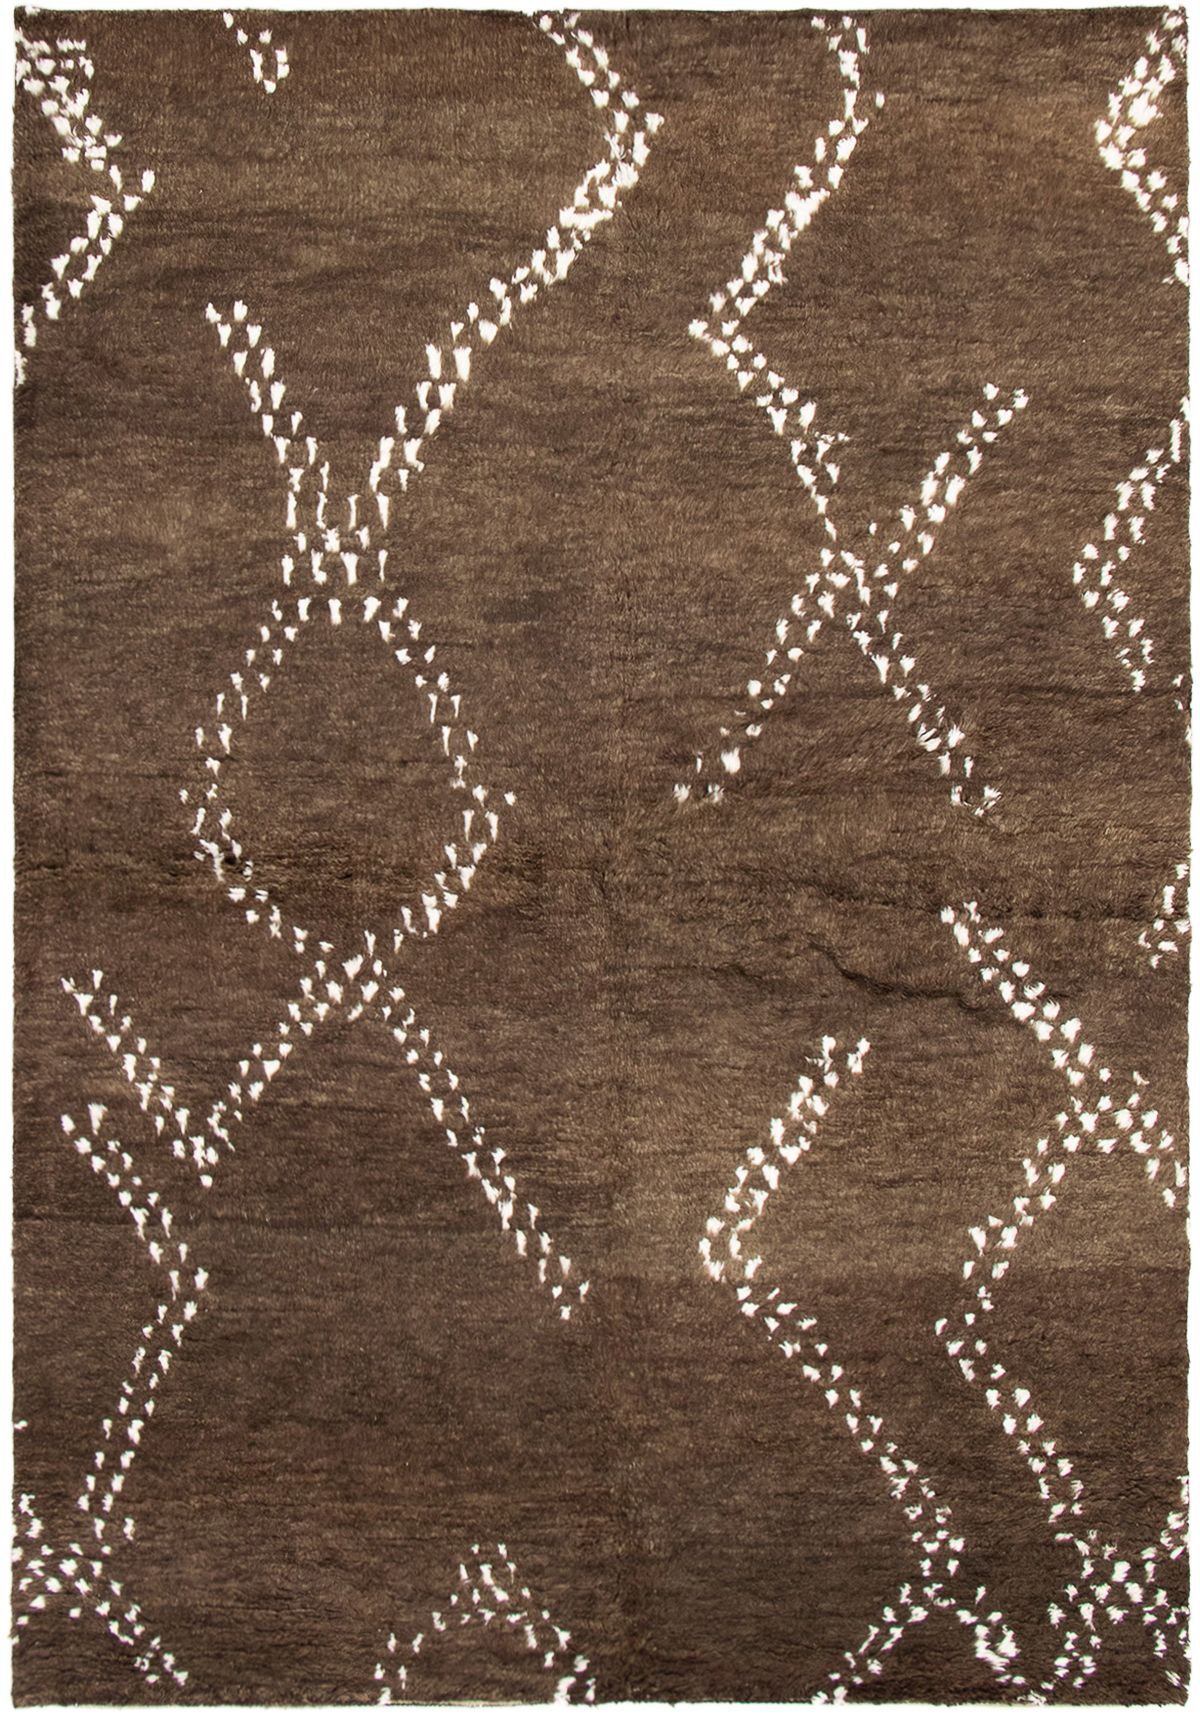 Hand-knotted Arlequin Dark Brown Wool Rug 6'3" x 9'0" Size: 6'3" x 9'0"  